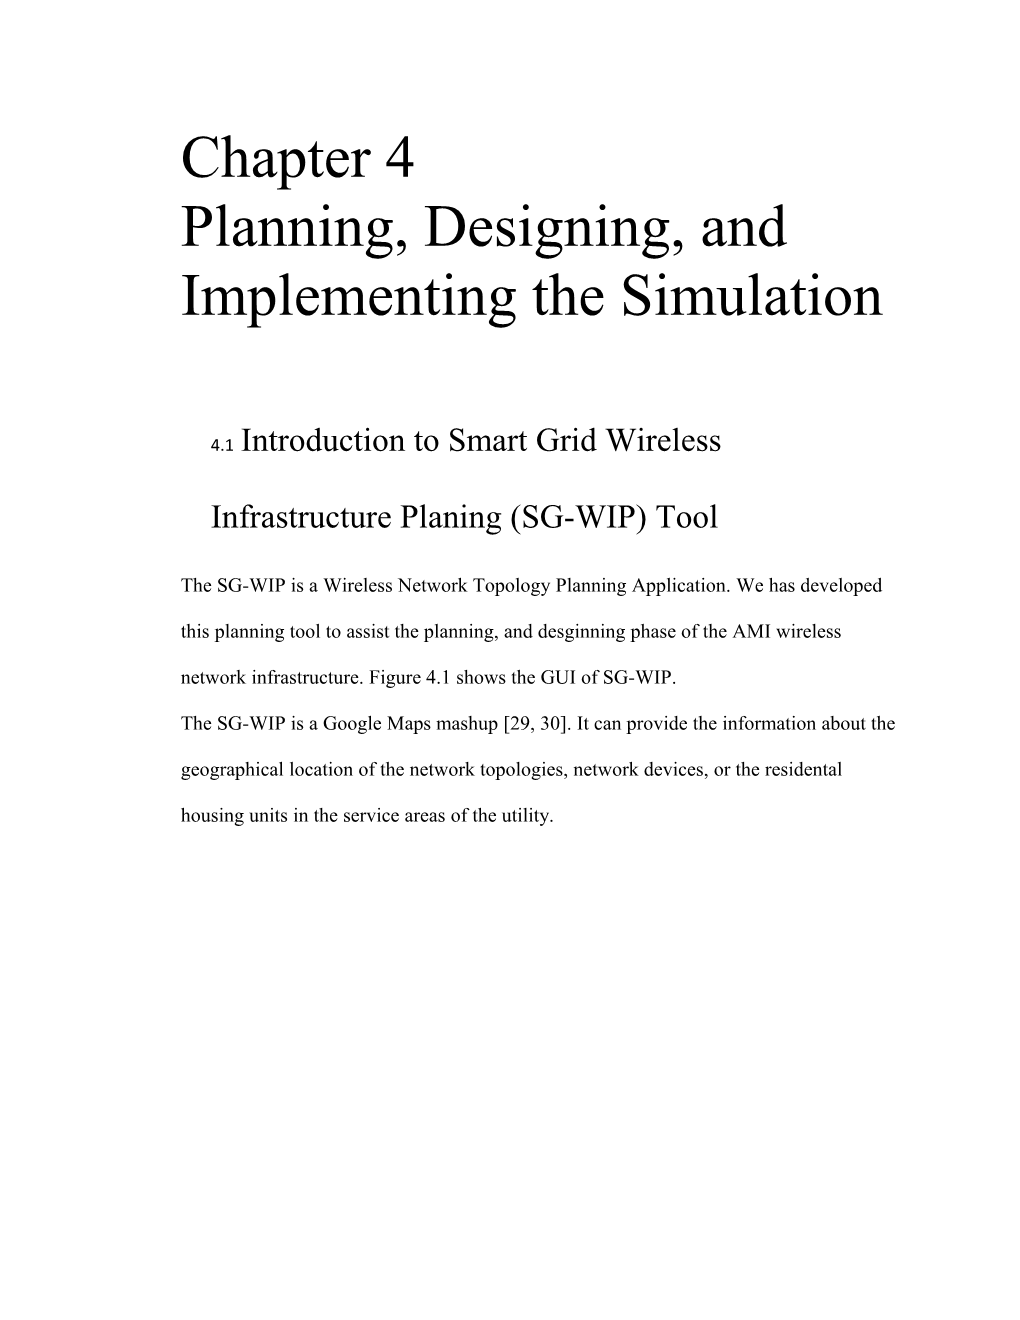 Planning, Designing, and Implementing the Simulation